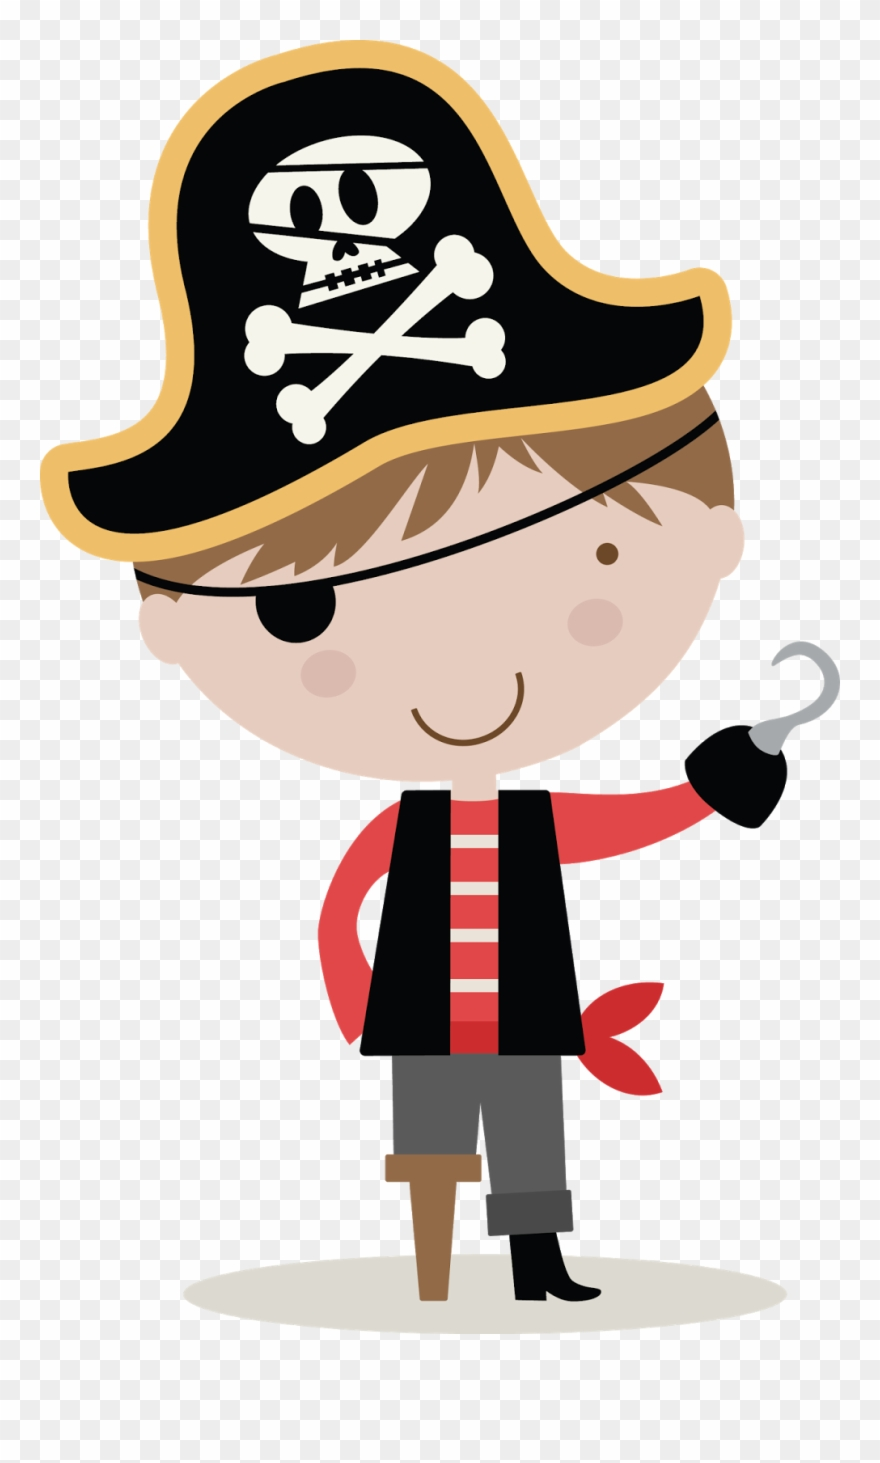 pirate clipart printable